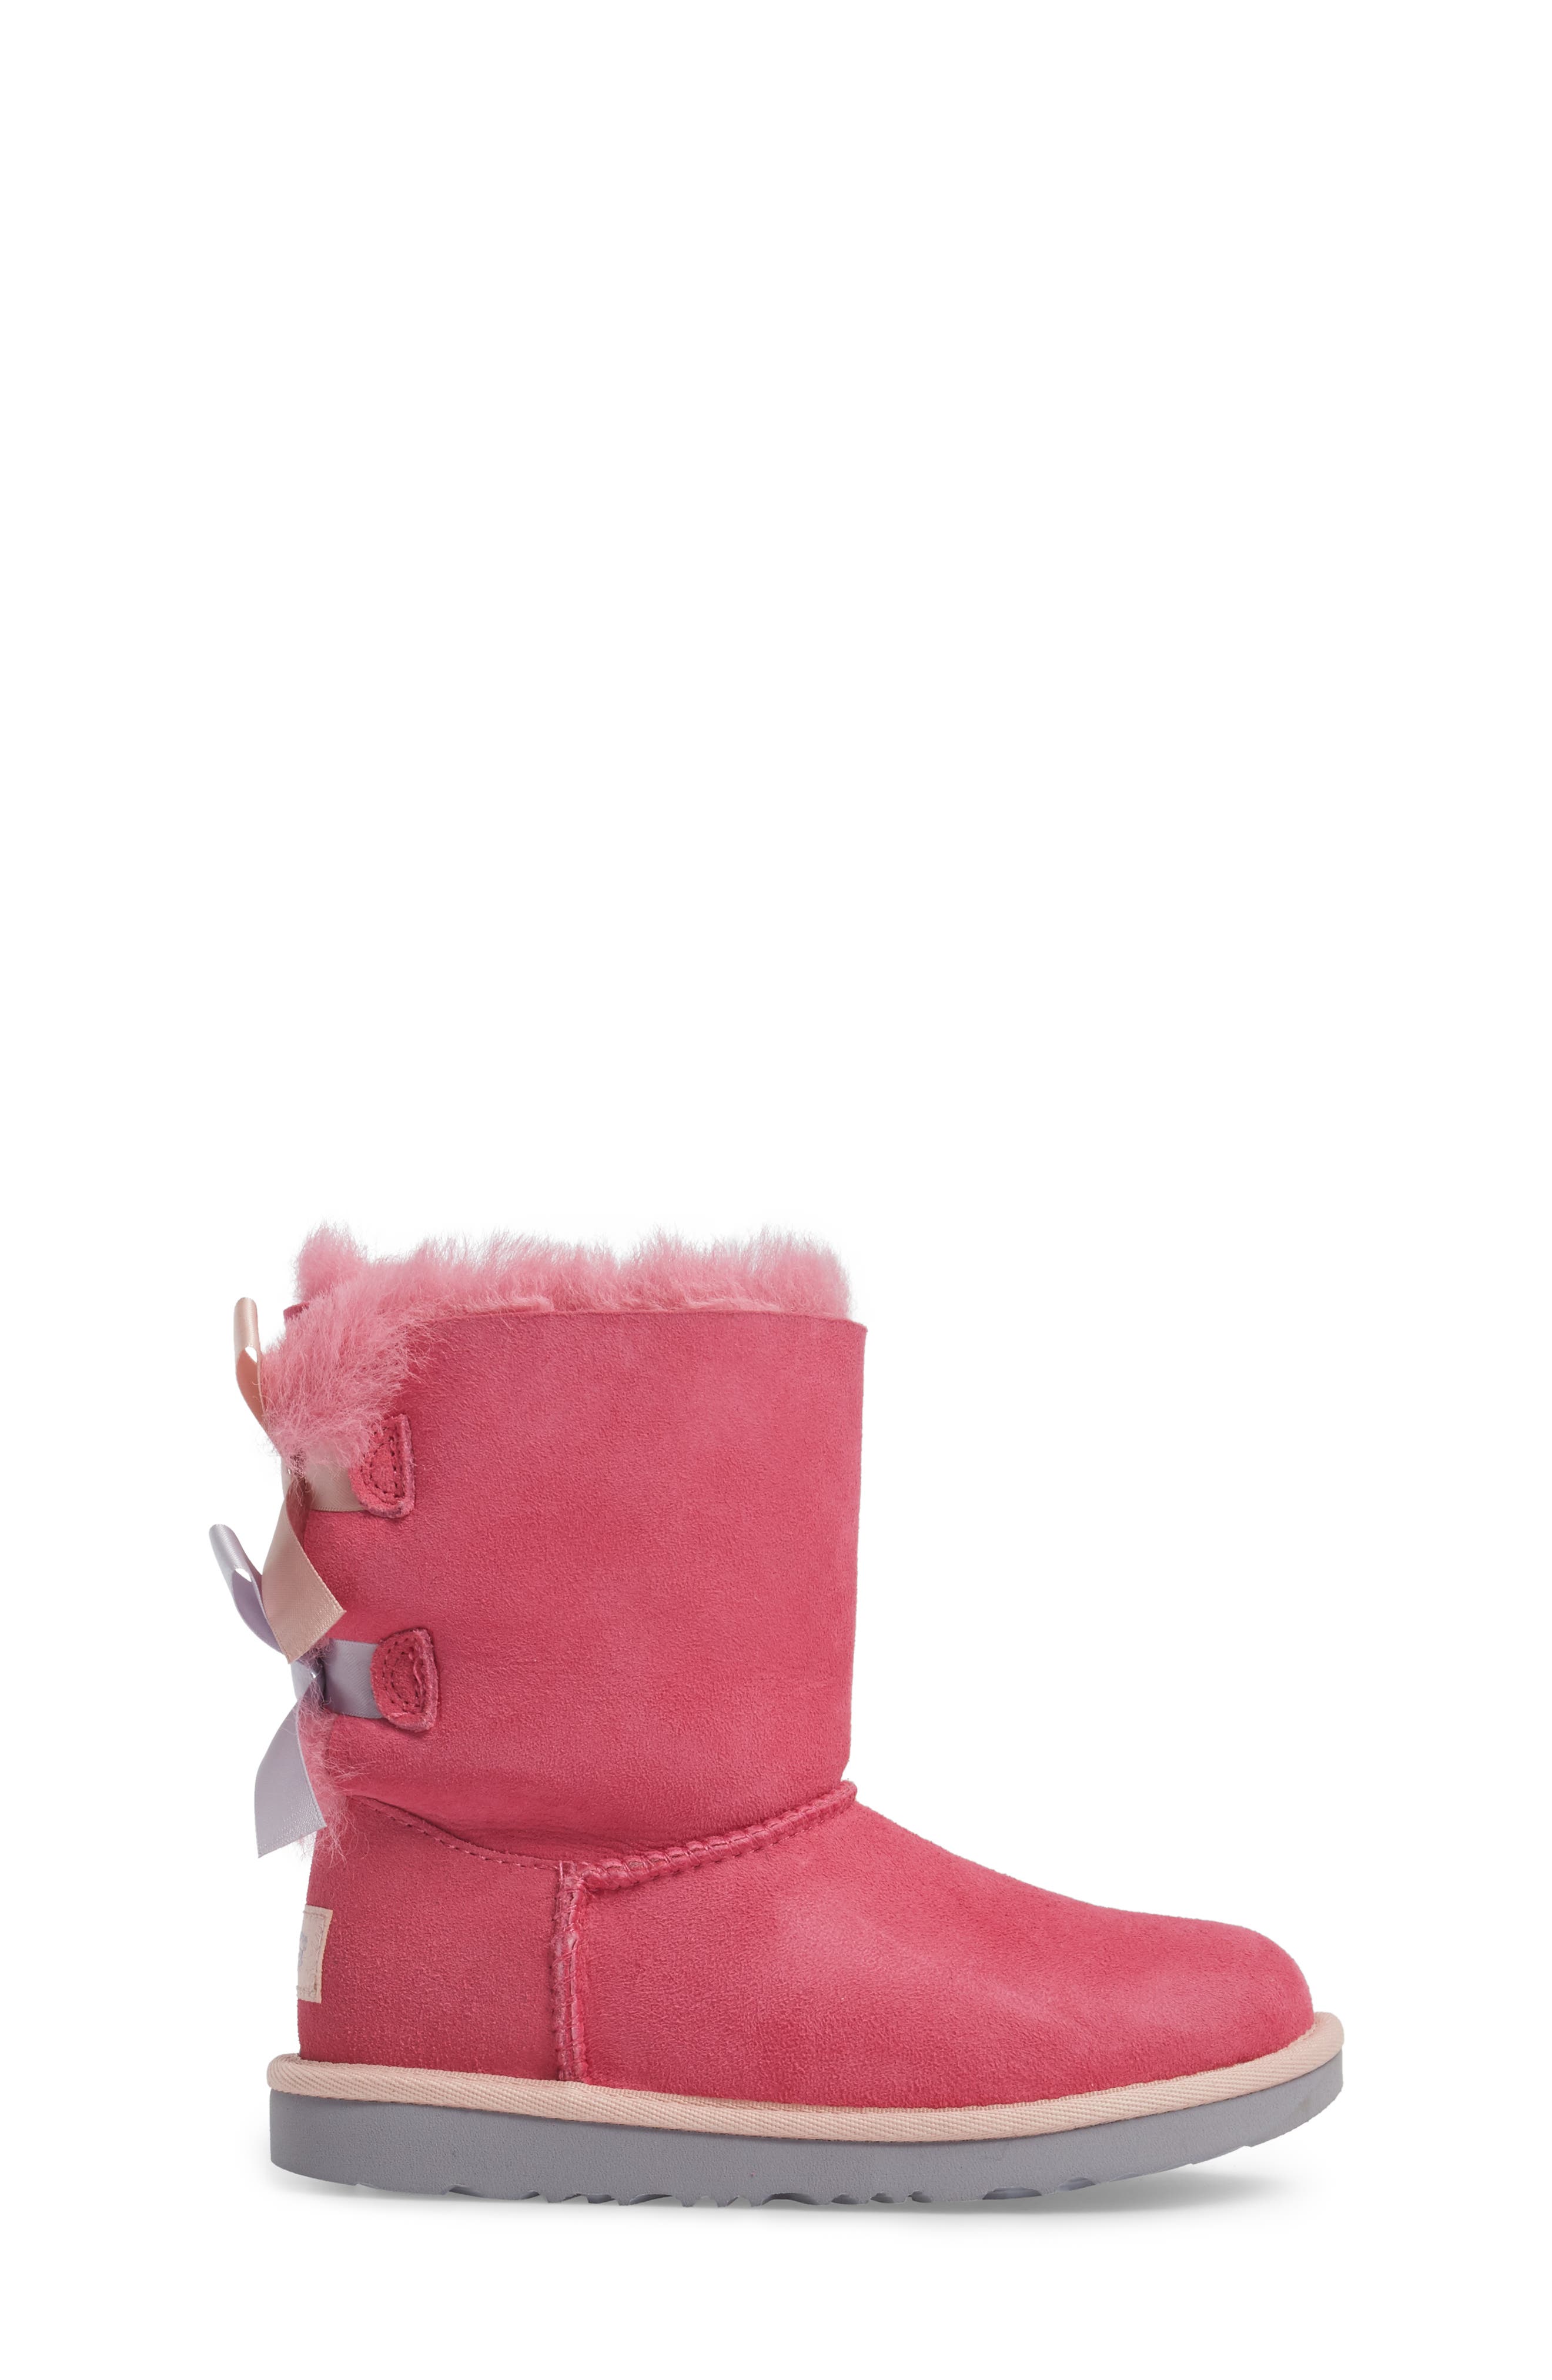 nordstrom ugg bailey bow